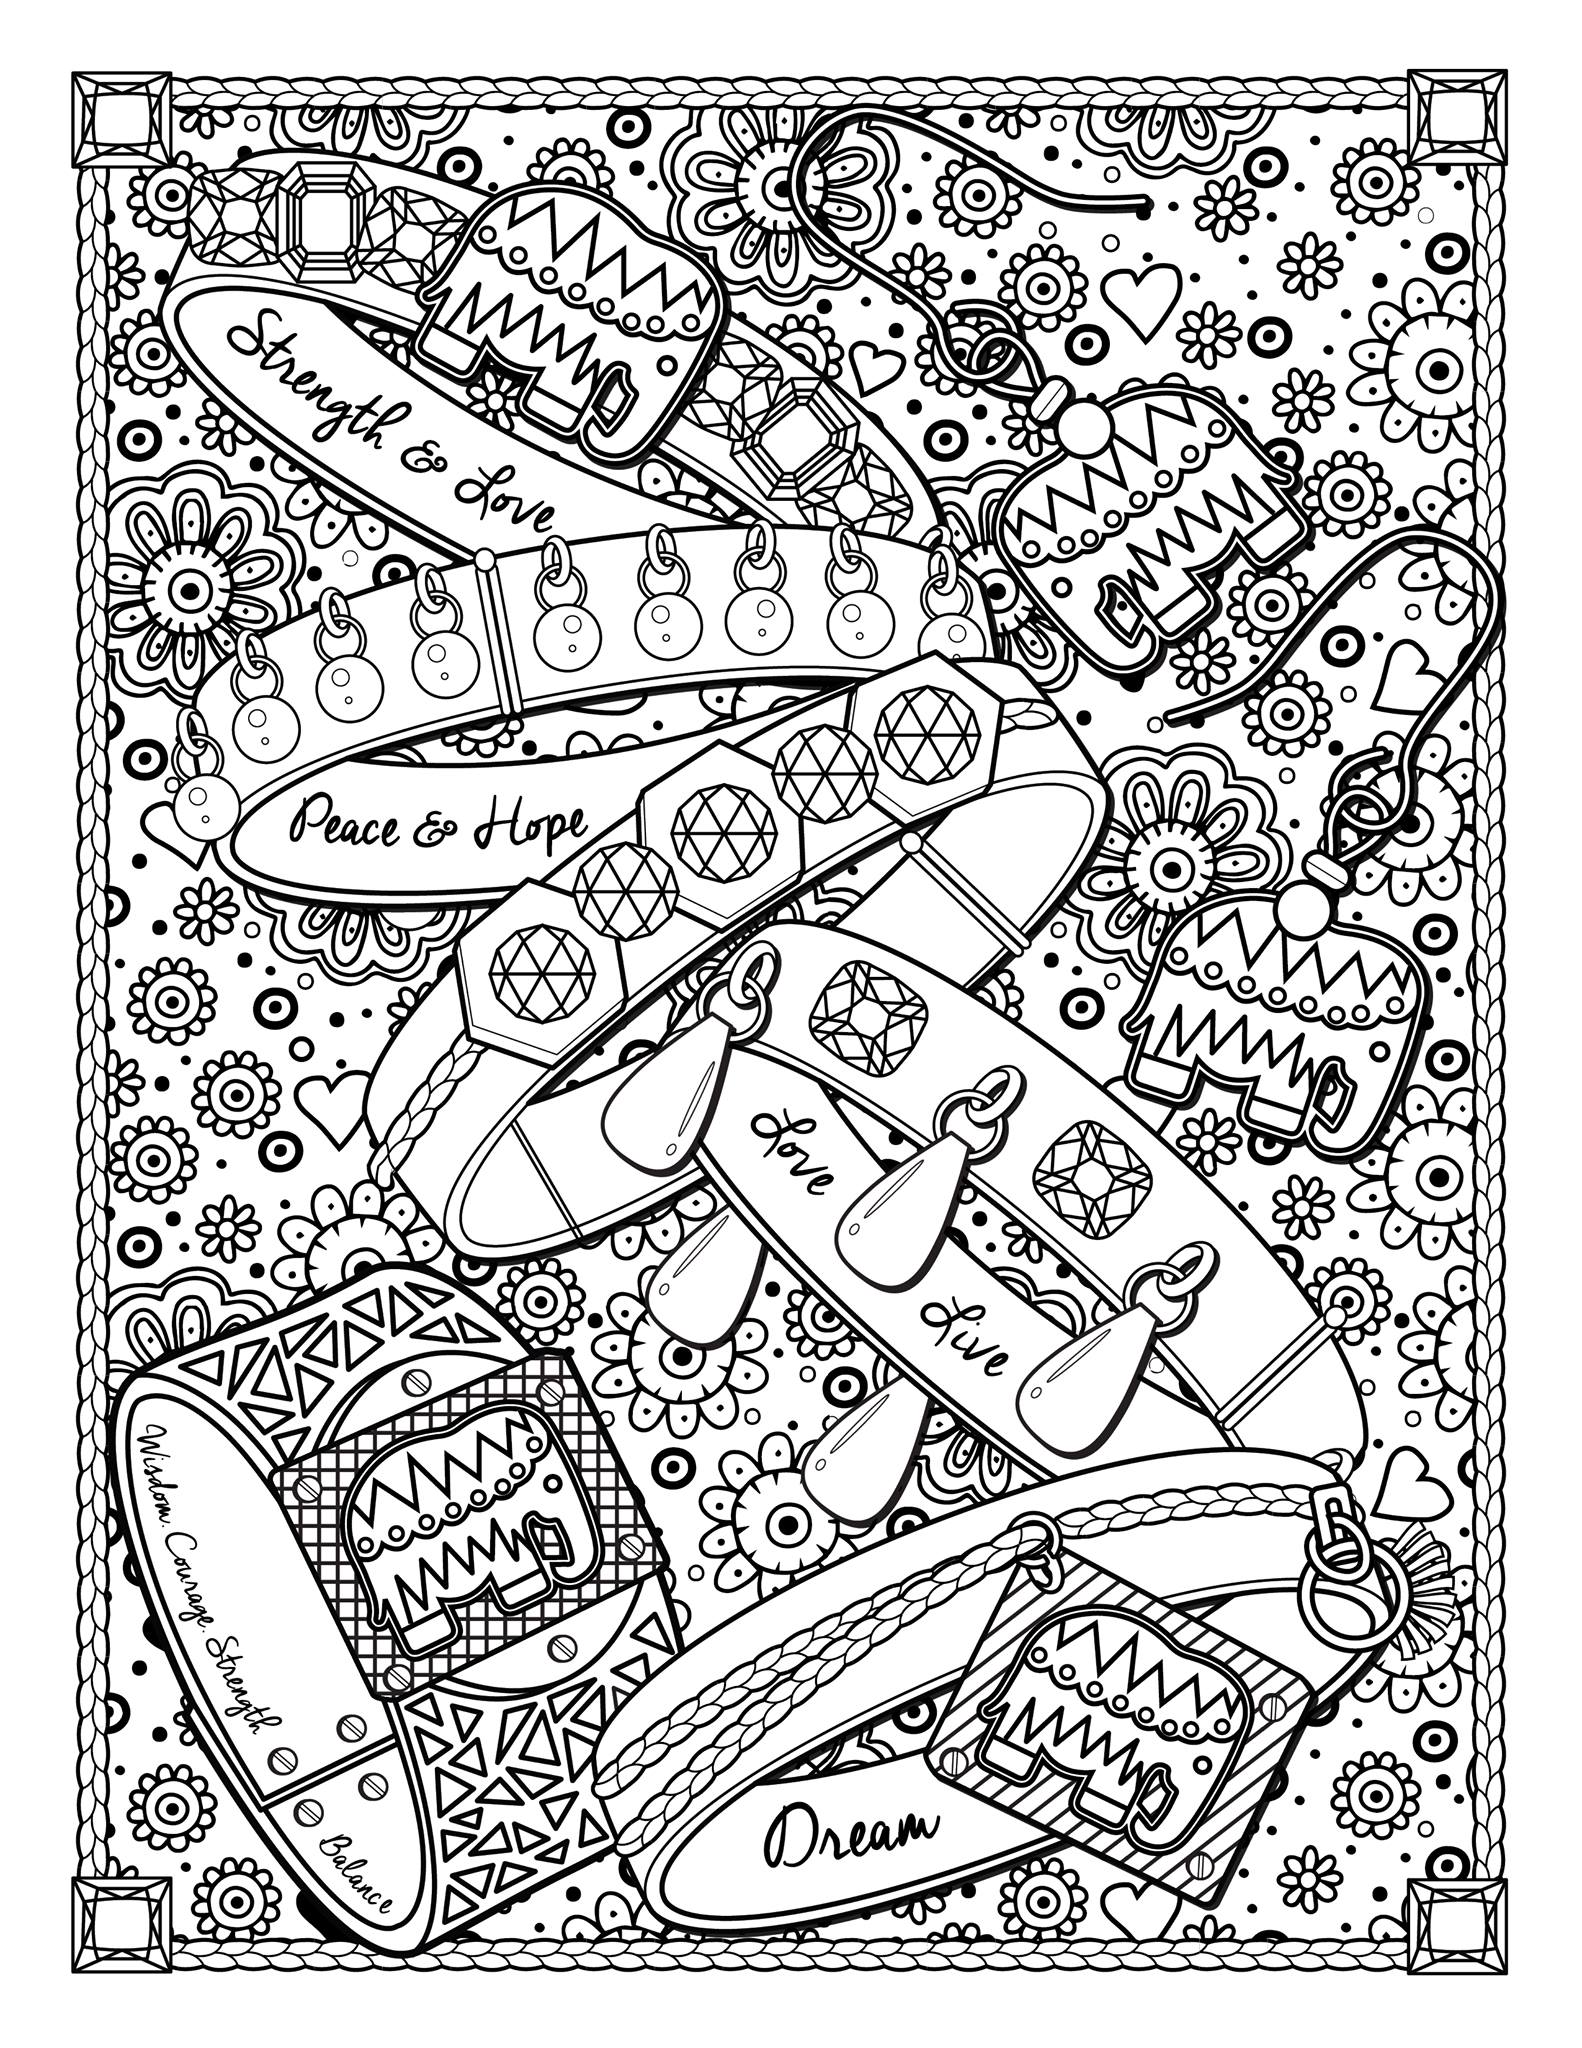 jewel coloring page